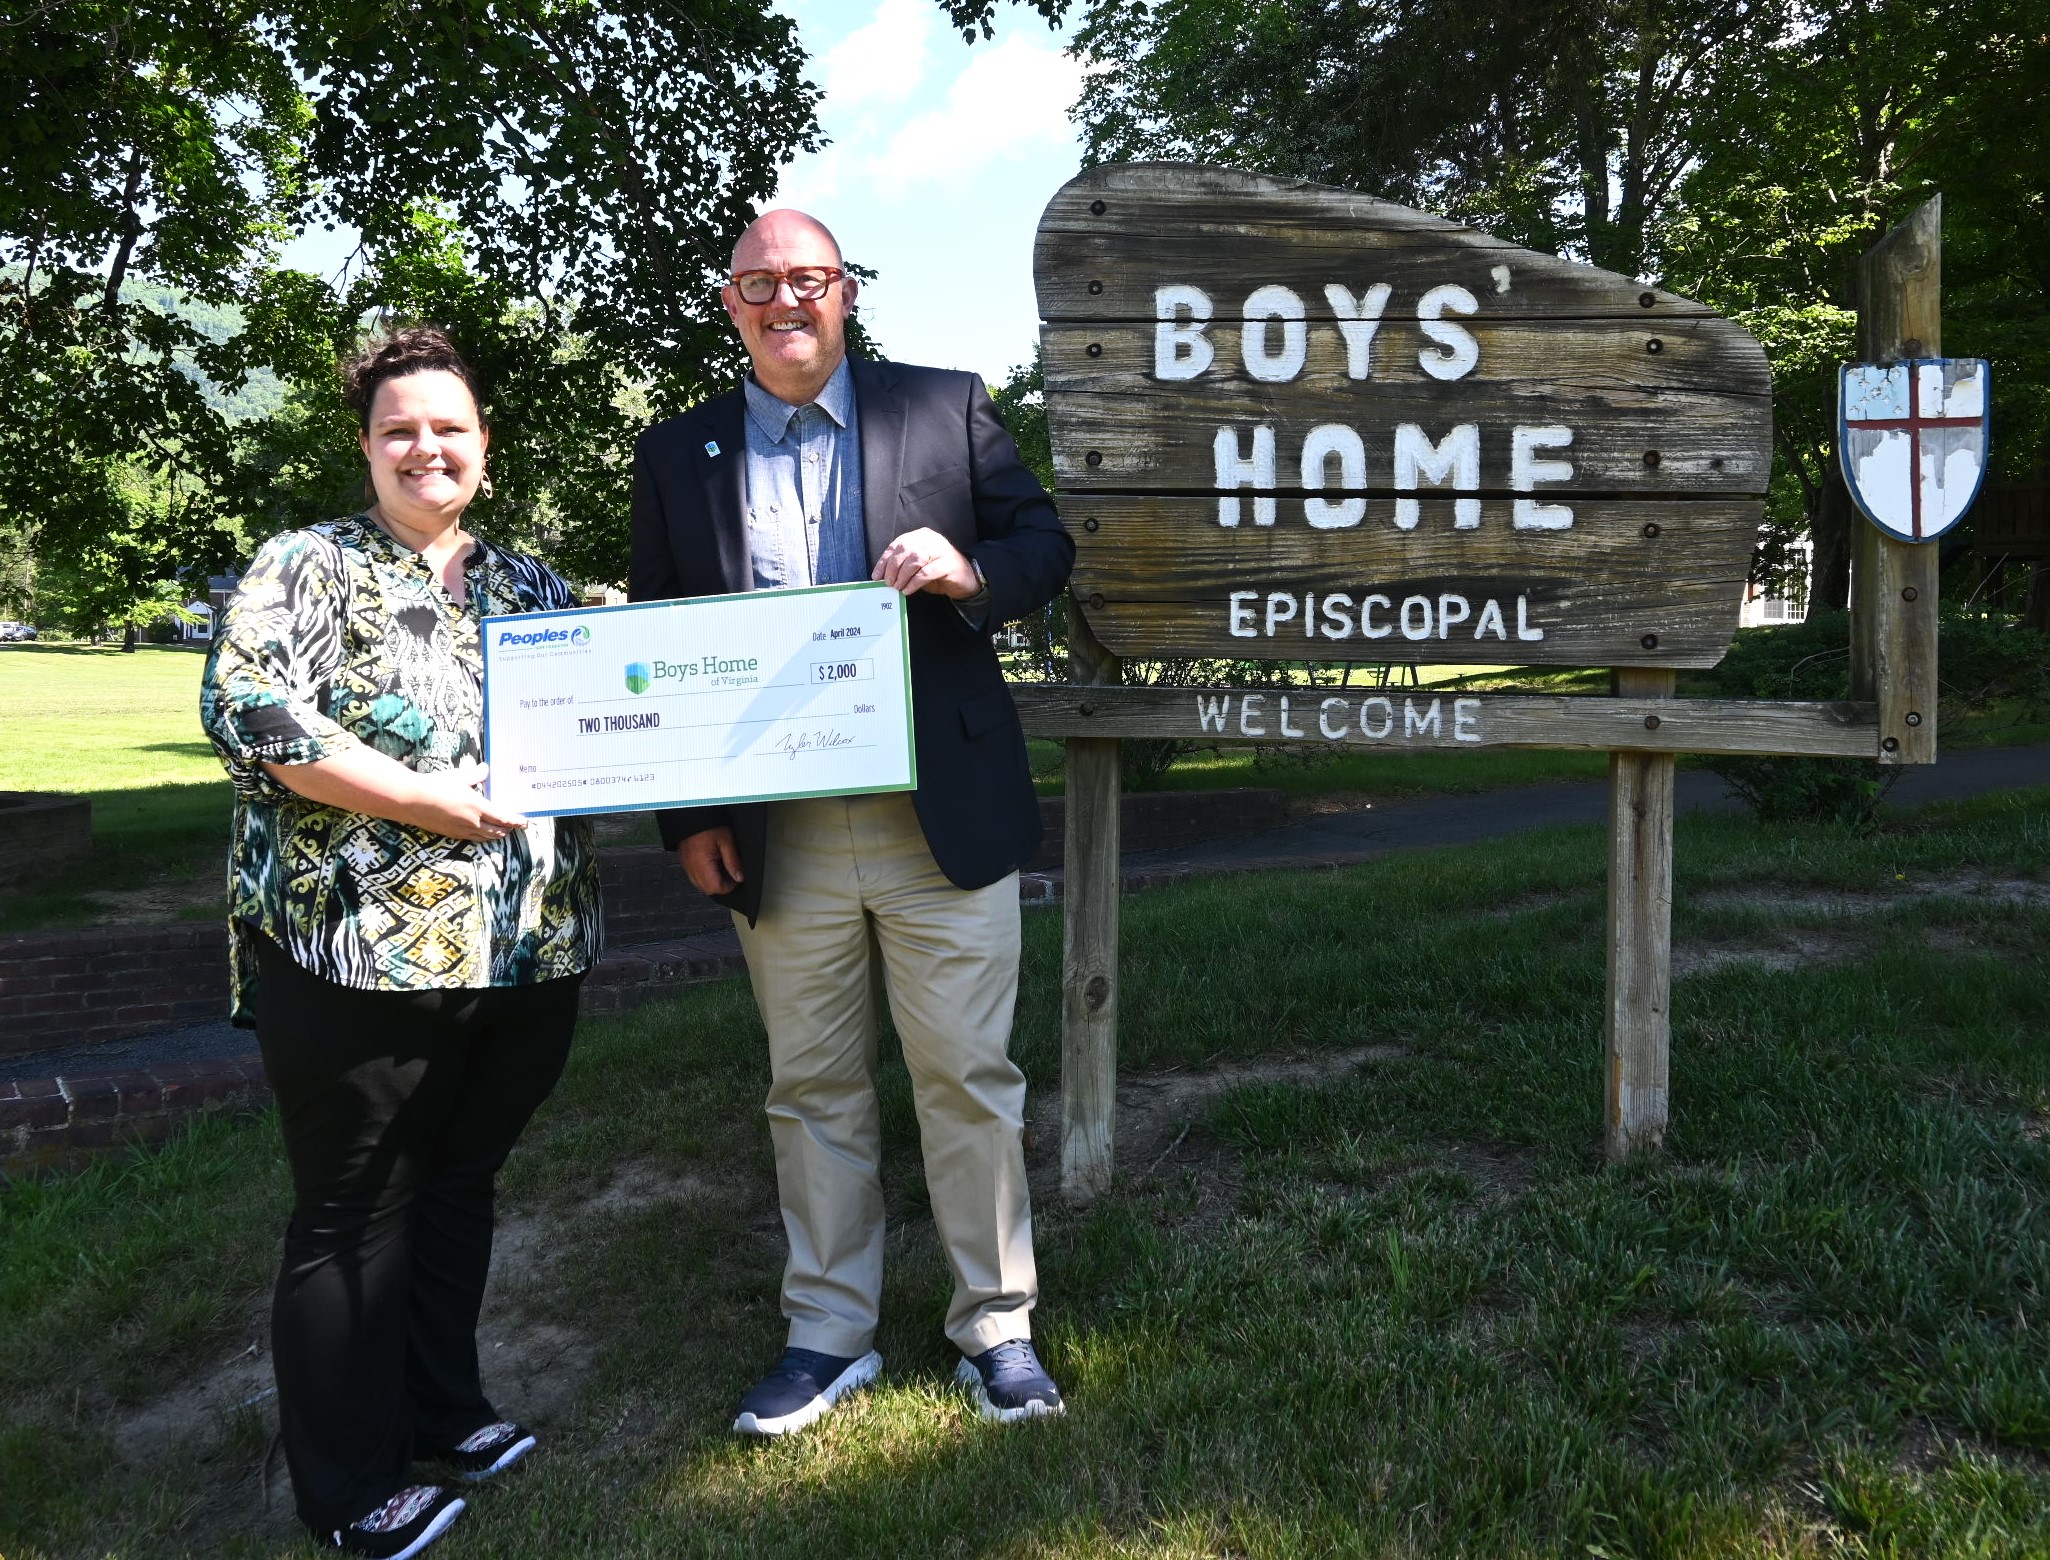 Pictured above are Afton Griffin, Branch Manager at Peoples Bank in Covington, and Chris Doyle, Executive Director of Boys Home